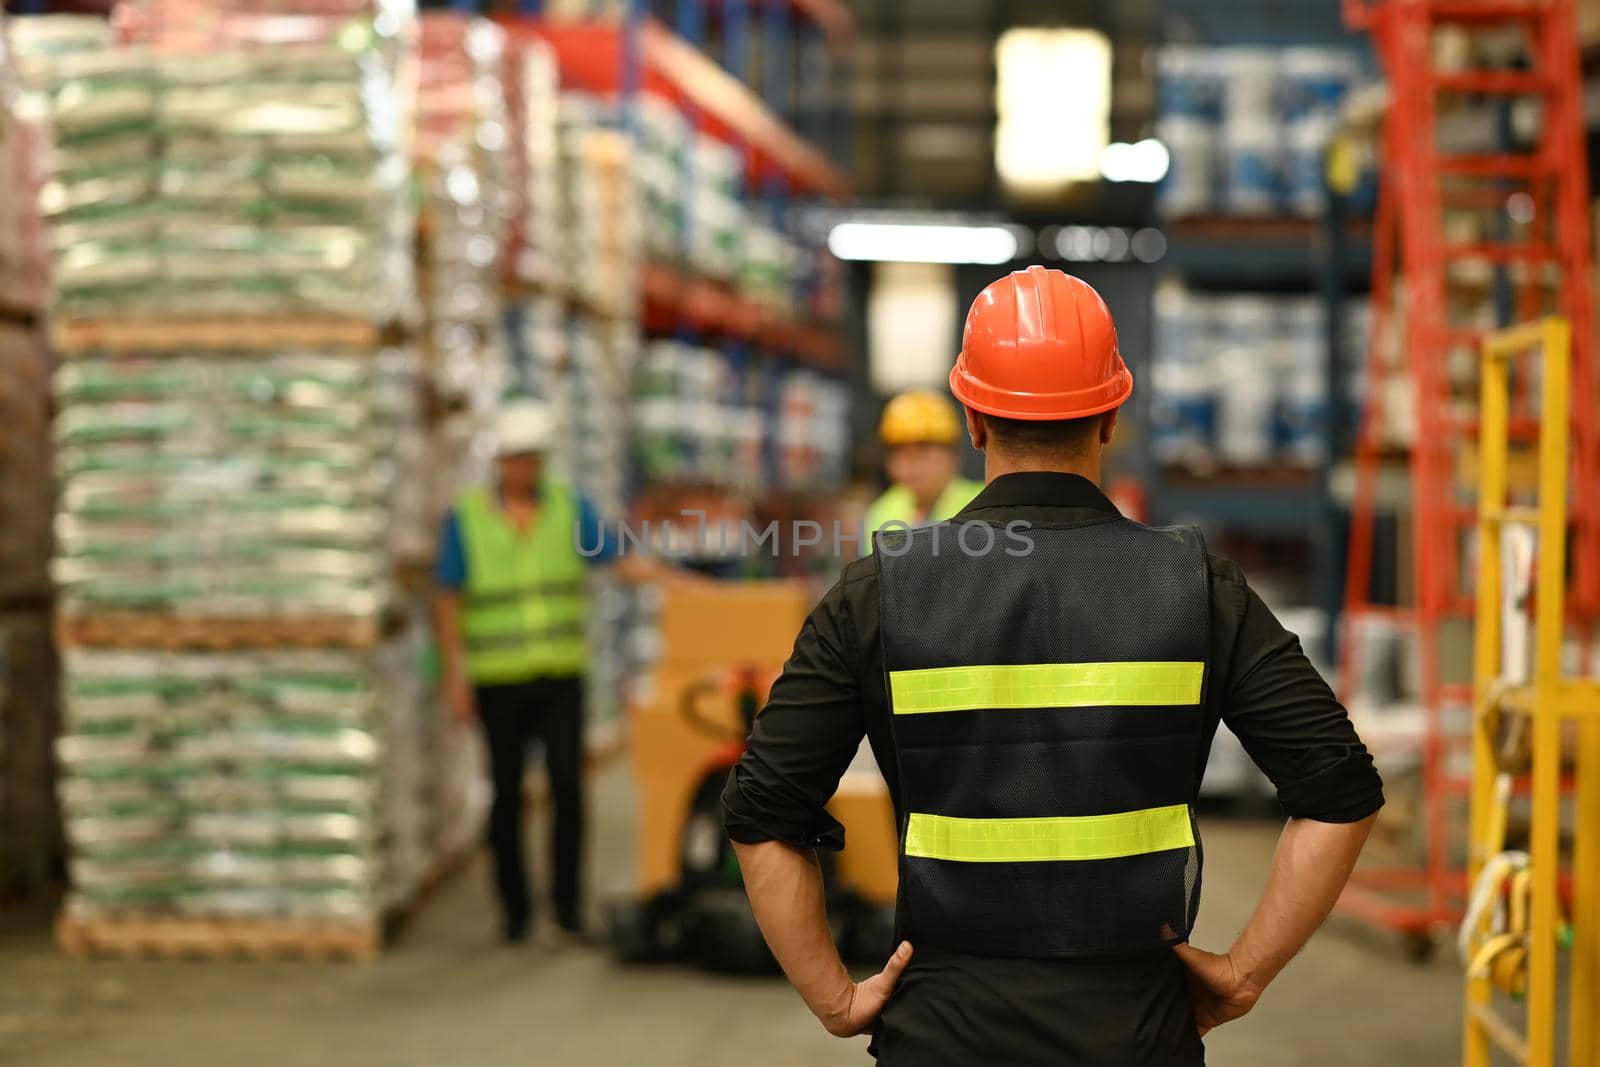 Rear view of male manager wearing hardhats and reflective jackets standing in warehouse with packed boxes on shelves in background.